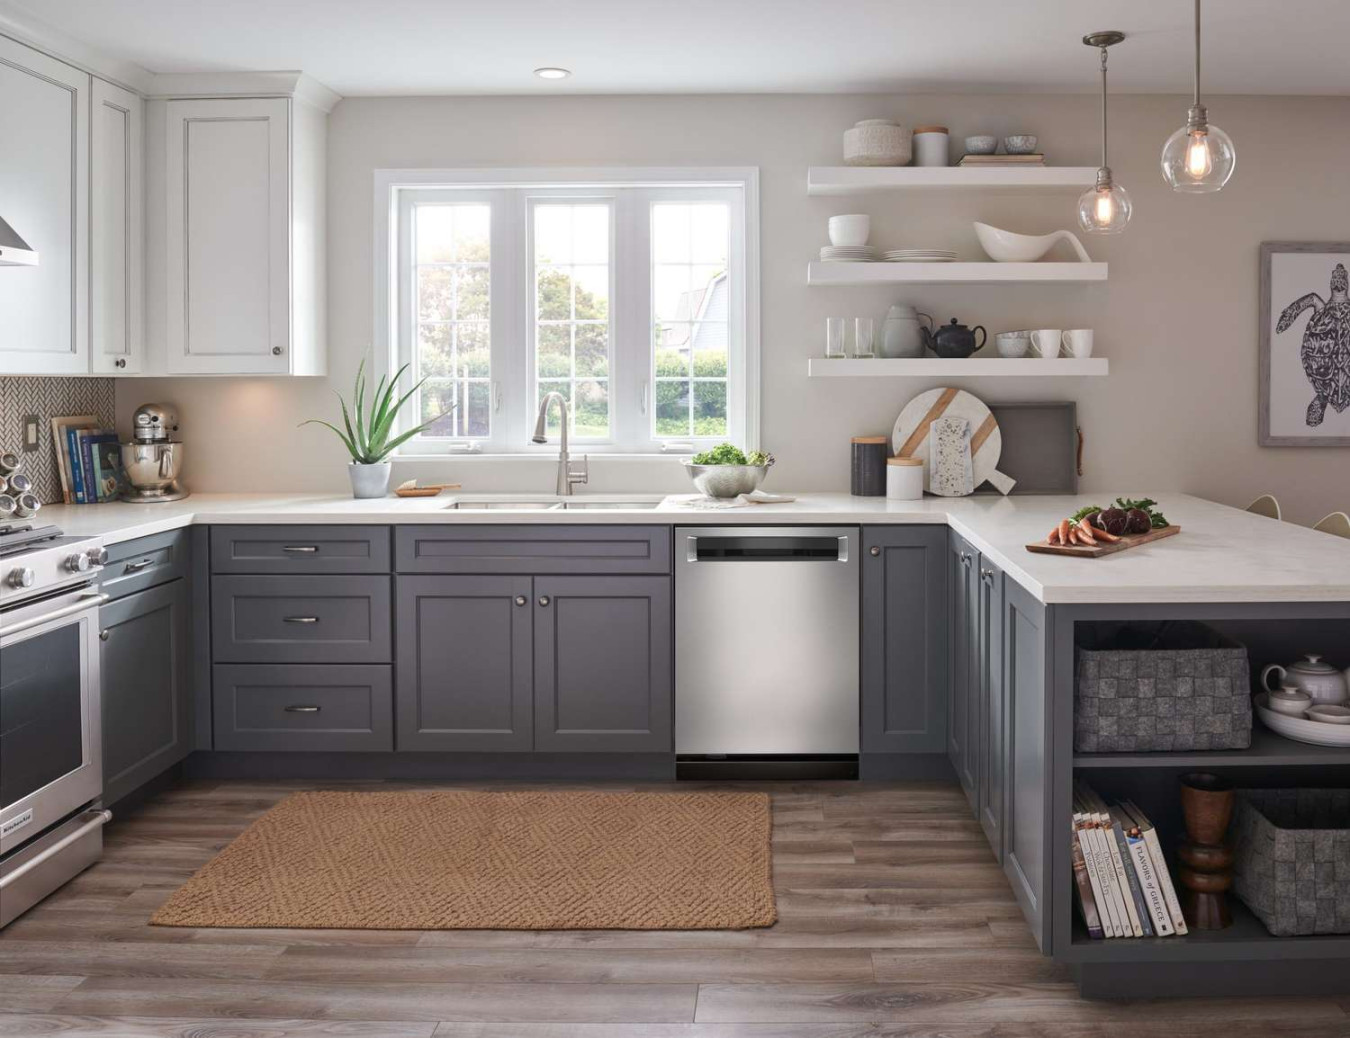 Kitchen Remodel Ideas for a More Beautiful, Functional Space